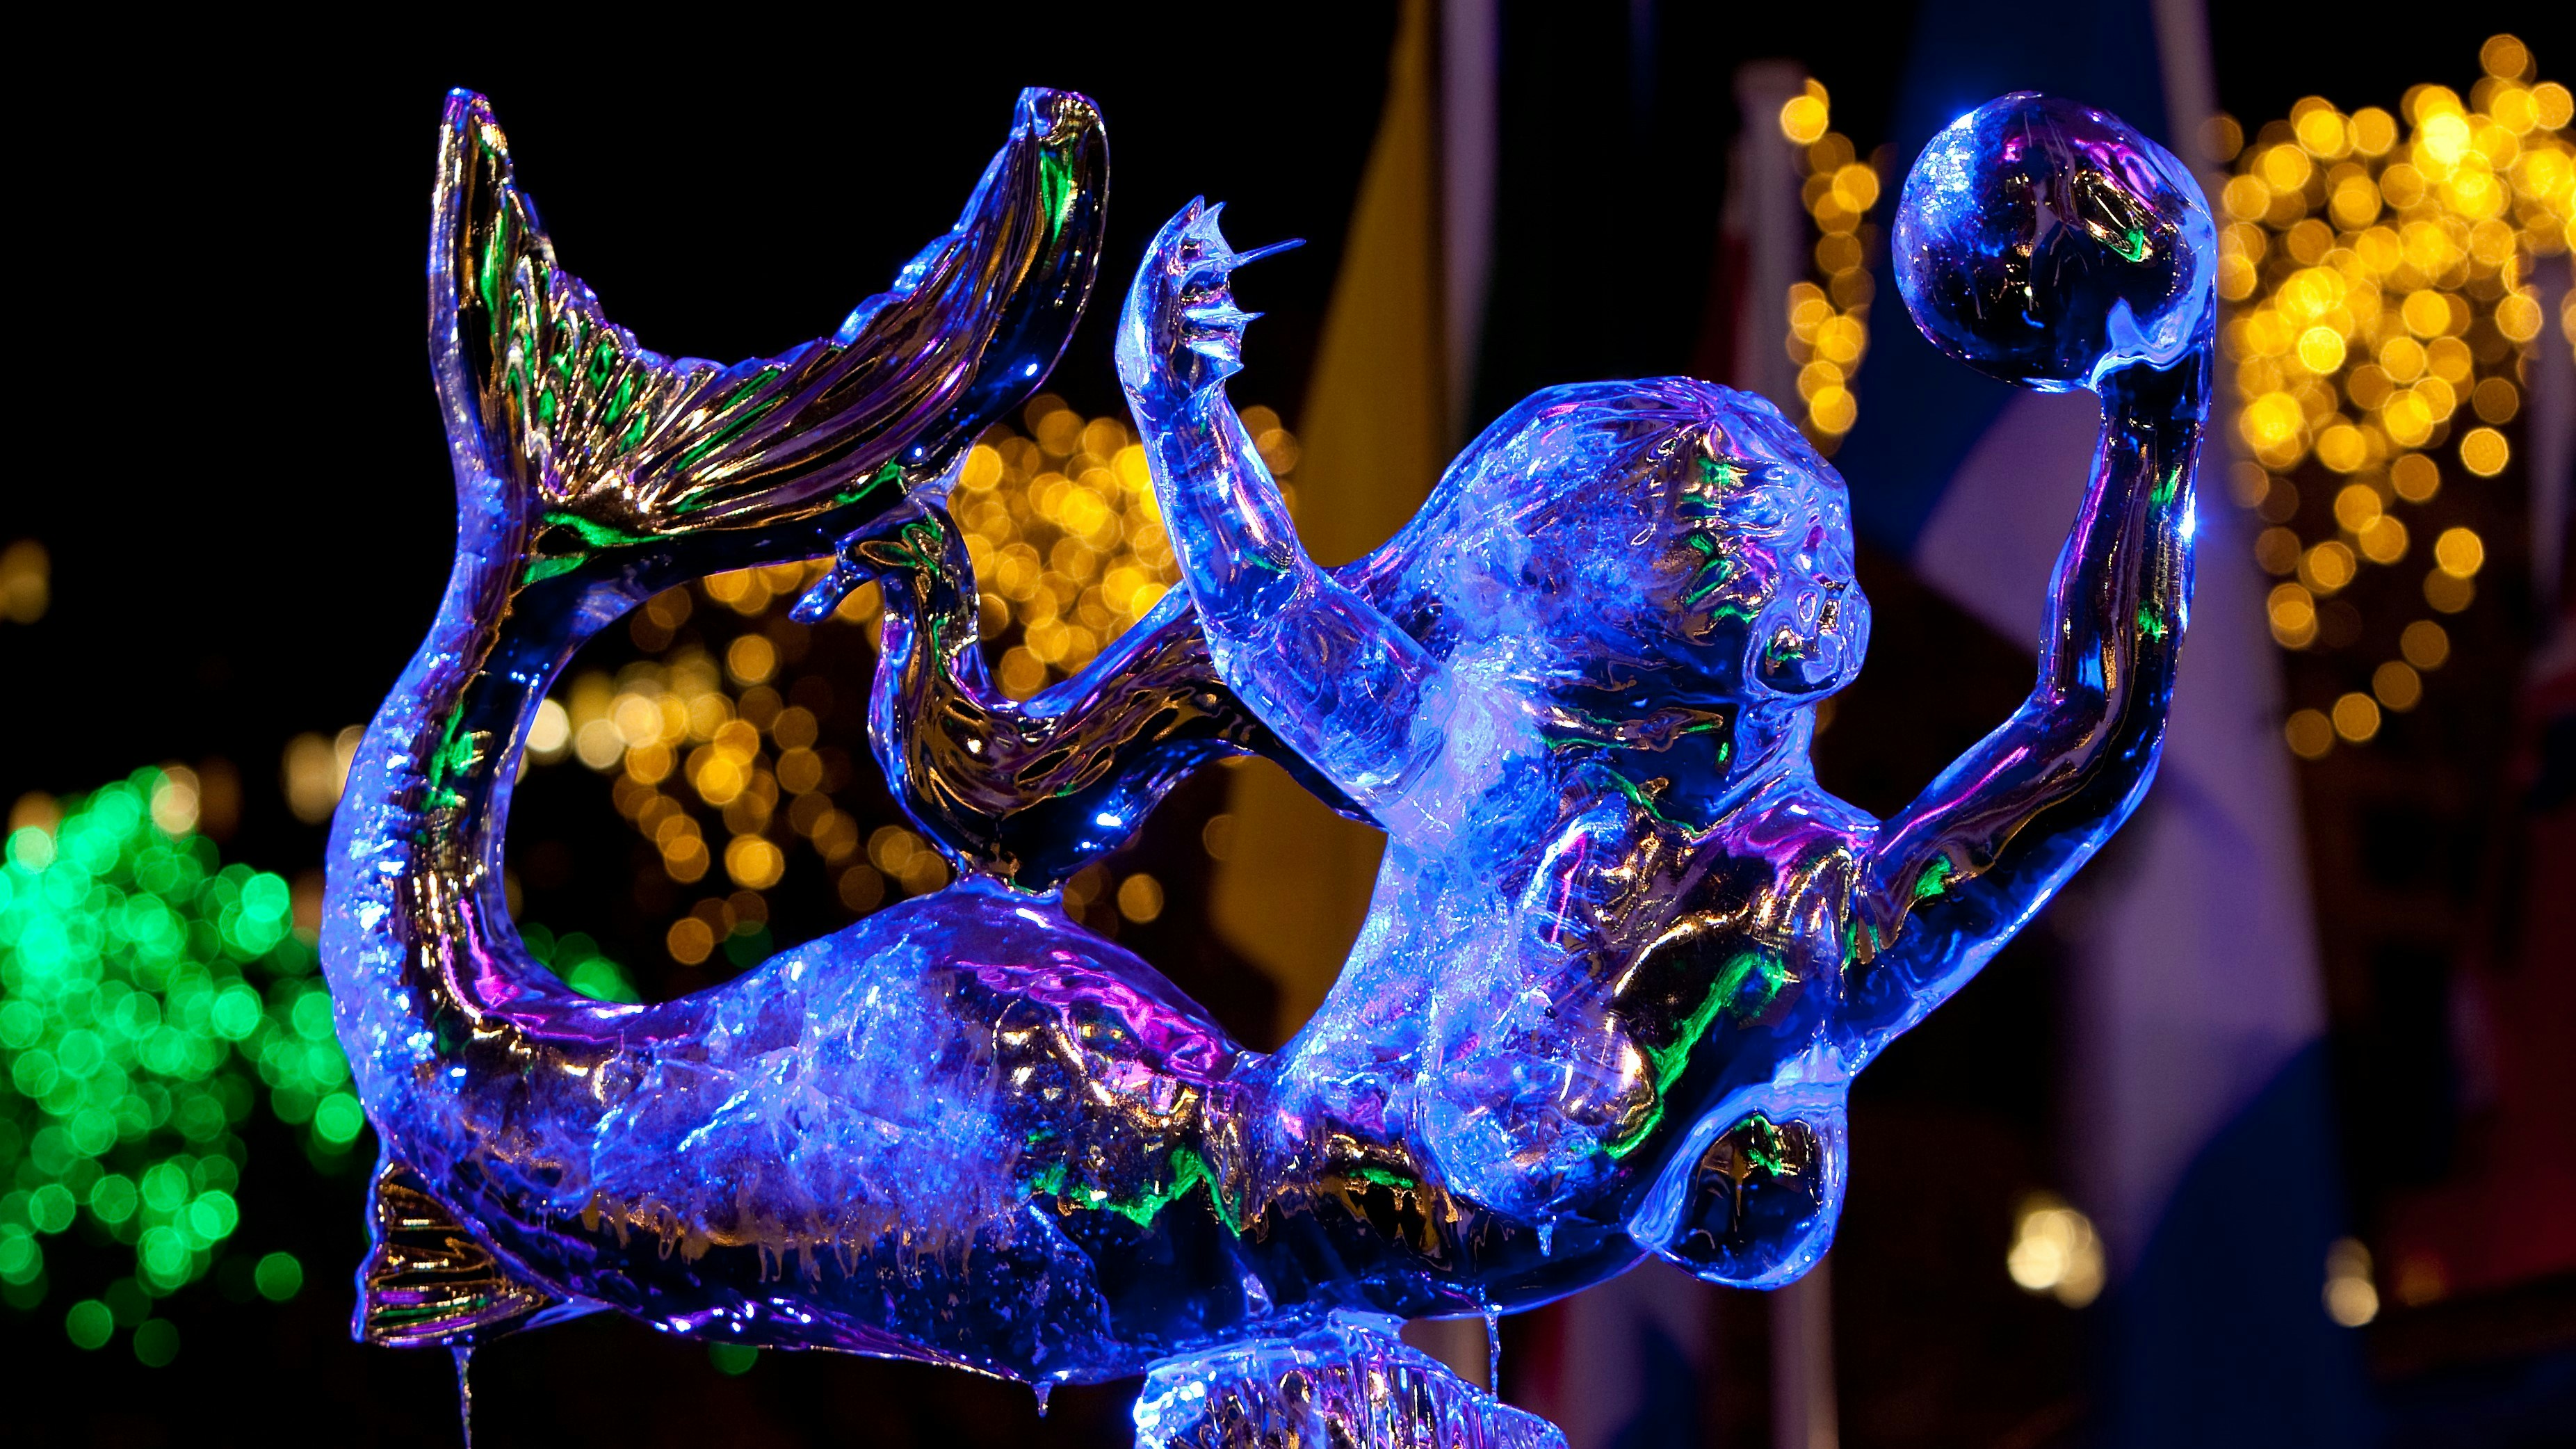 A beautiful ice-sculpture by some artist at Winterlude festival in Ottawa, Canada.